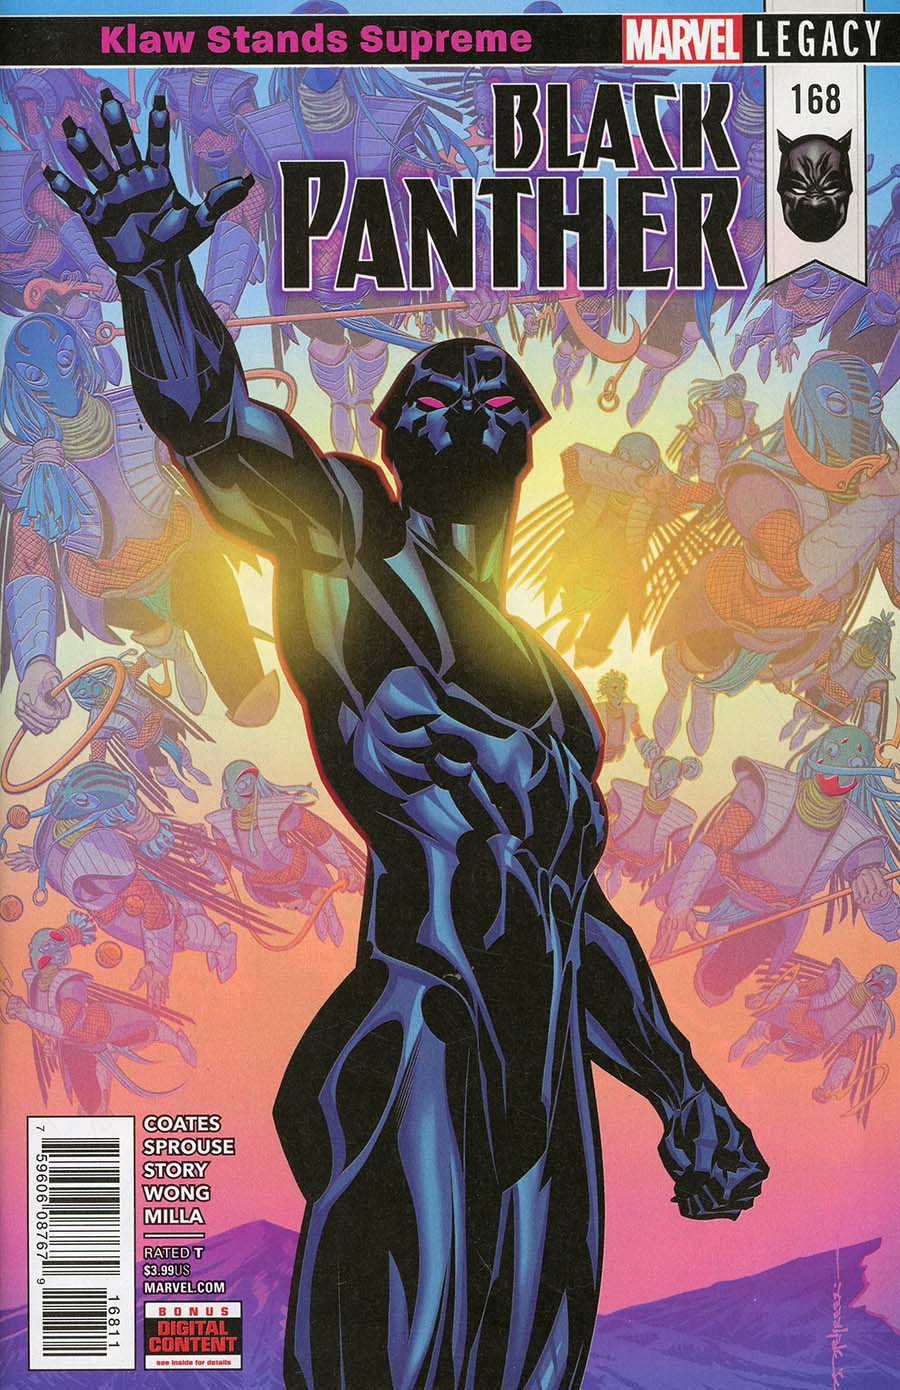 Black Panther Vol 6 #168 Cover A Regular Brian Stelfreeze Cover (Marvel Legacy Tie-In)